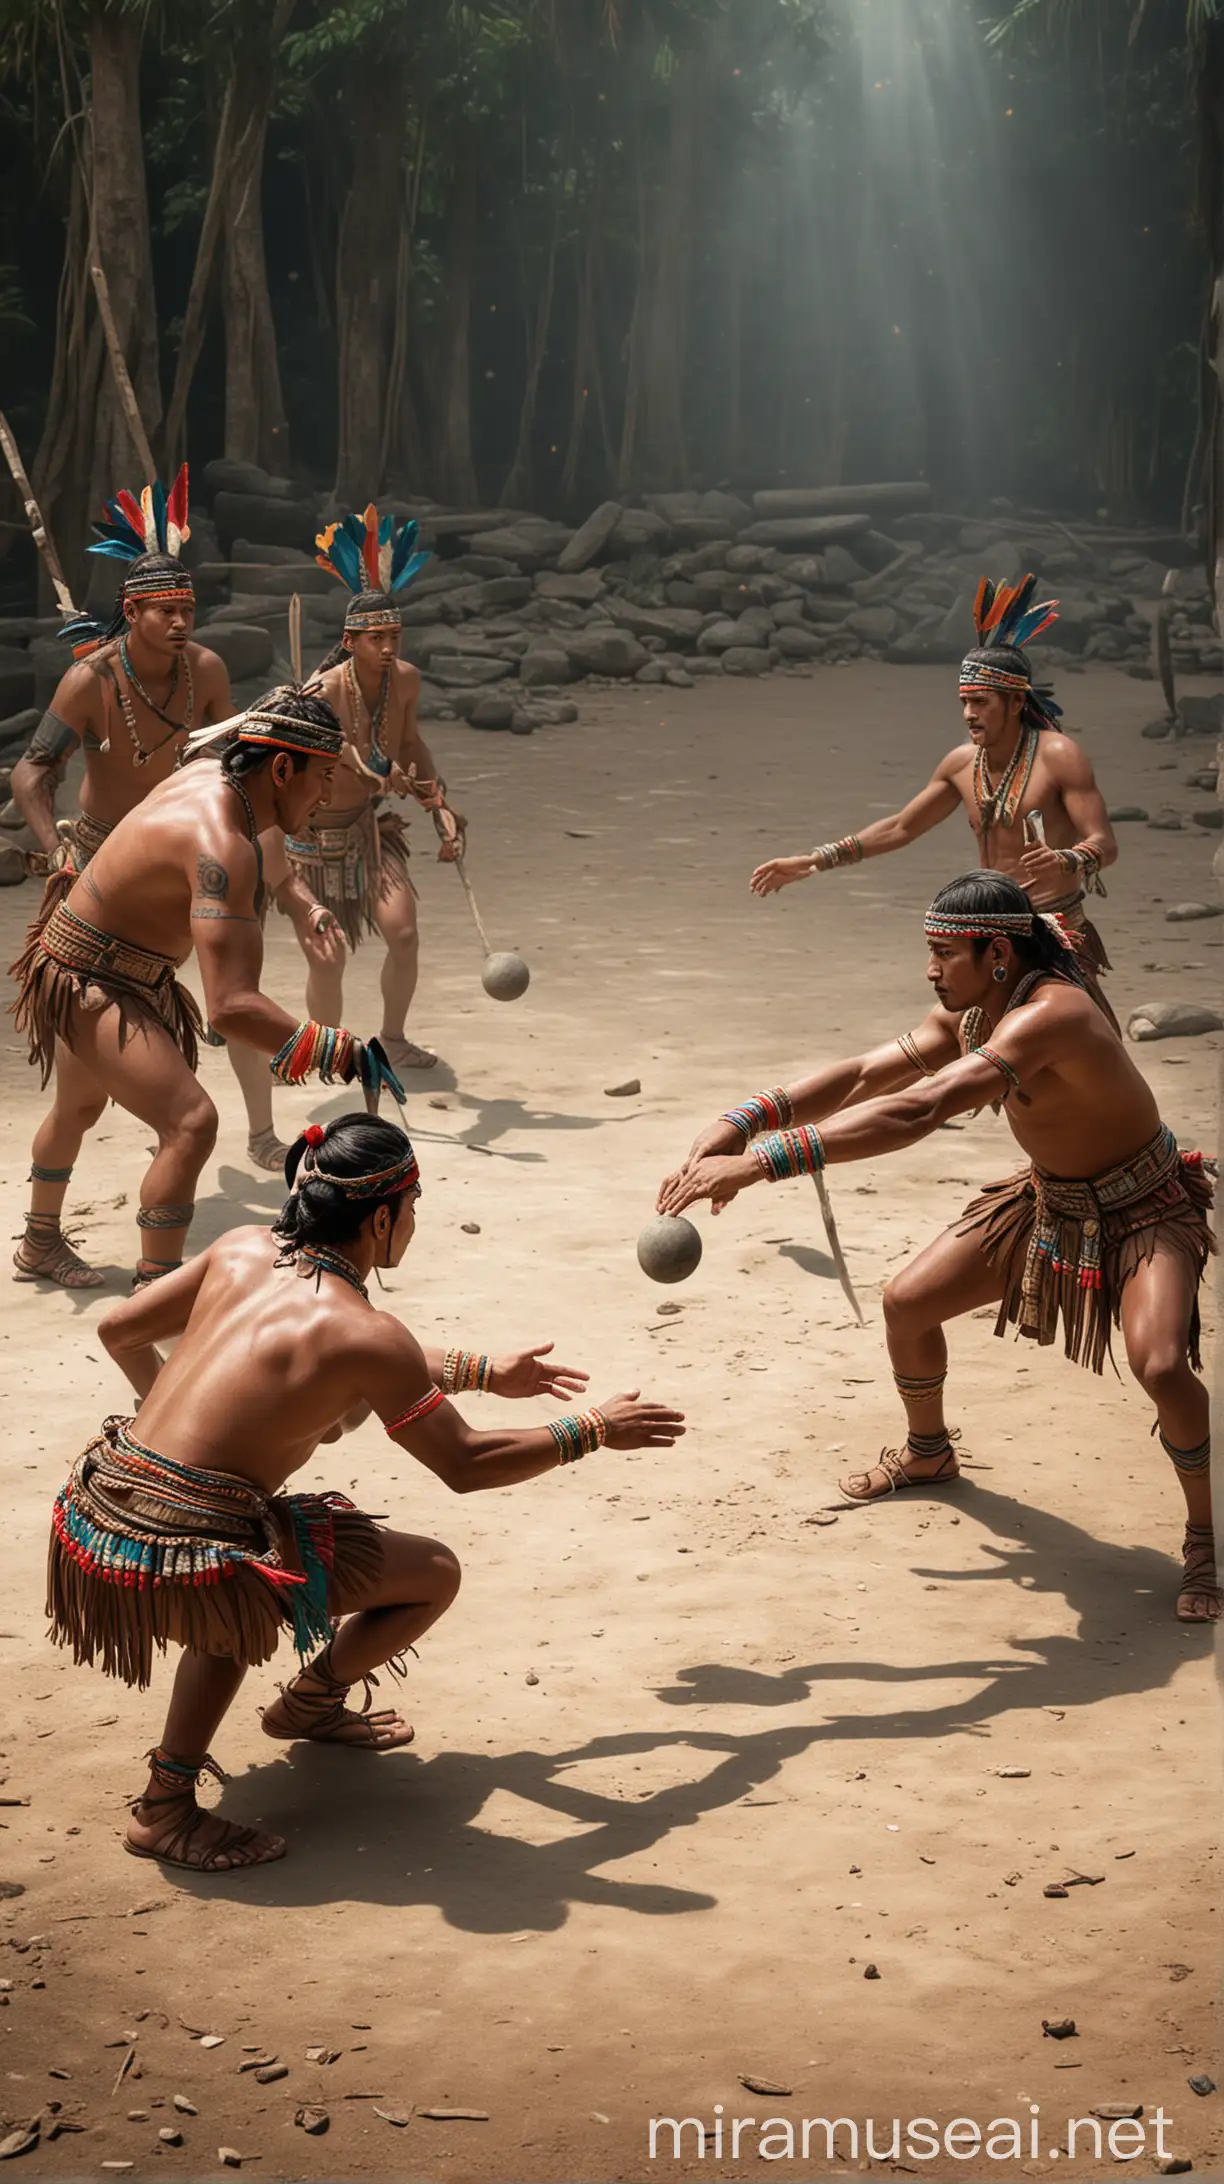 An illustration of Mayan players engaged in the Pokotar game, using their hips and knees to pass the ball through a ring. hyper realistic